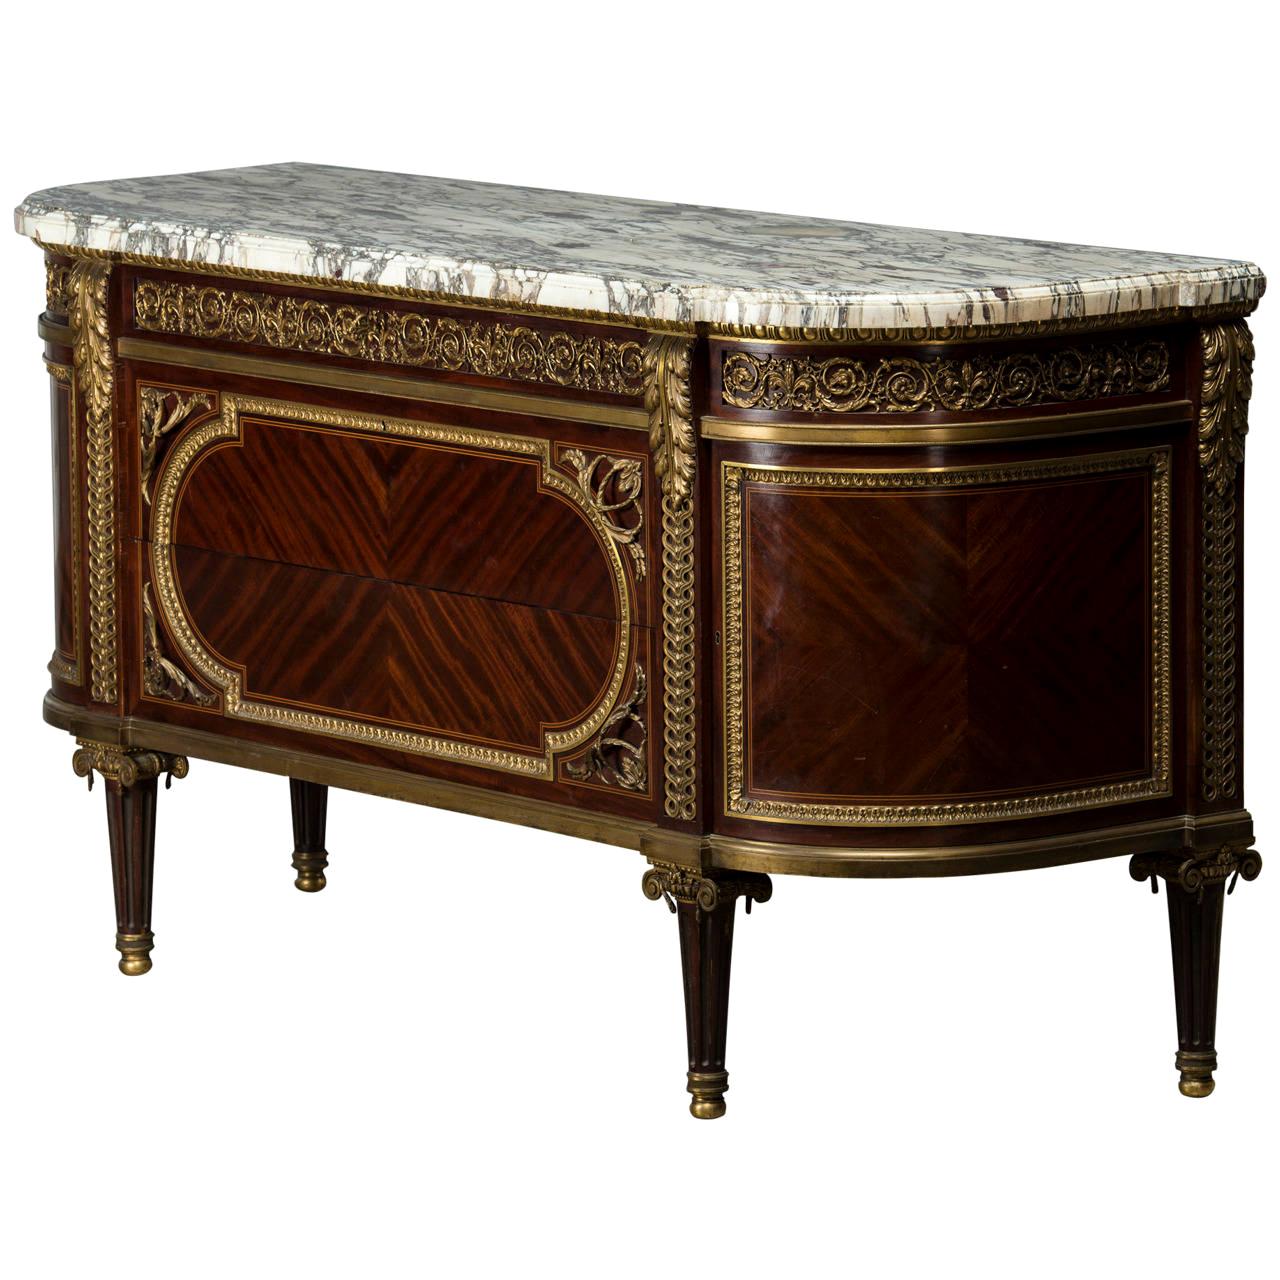 French Ormolu-Mounted Mahogany Commode after the Model by Jean-Francois Leleu